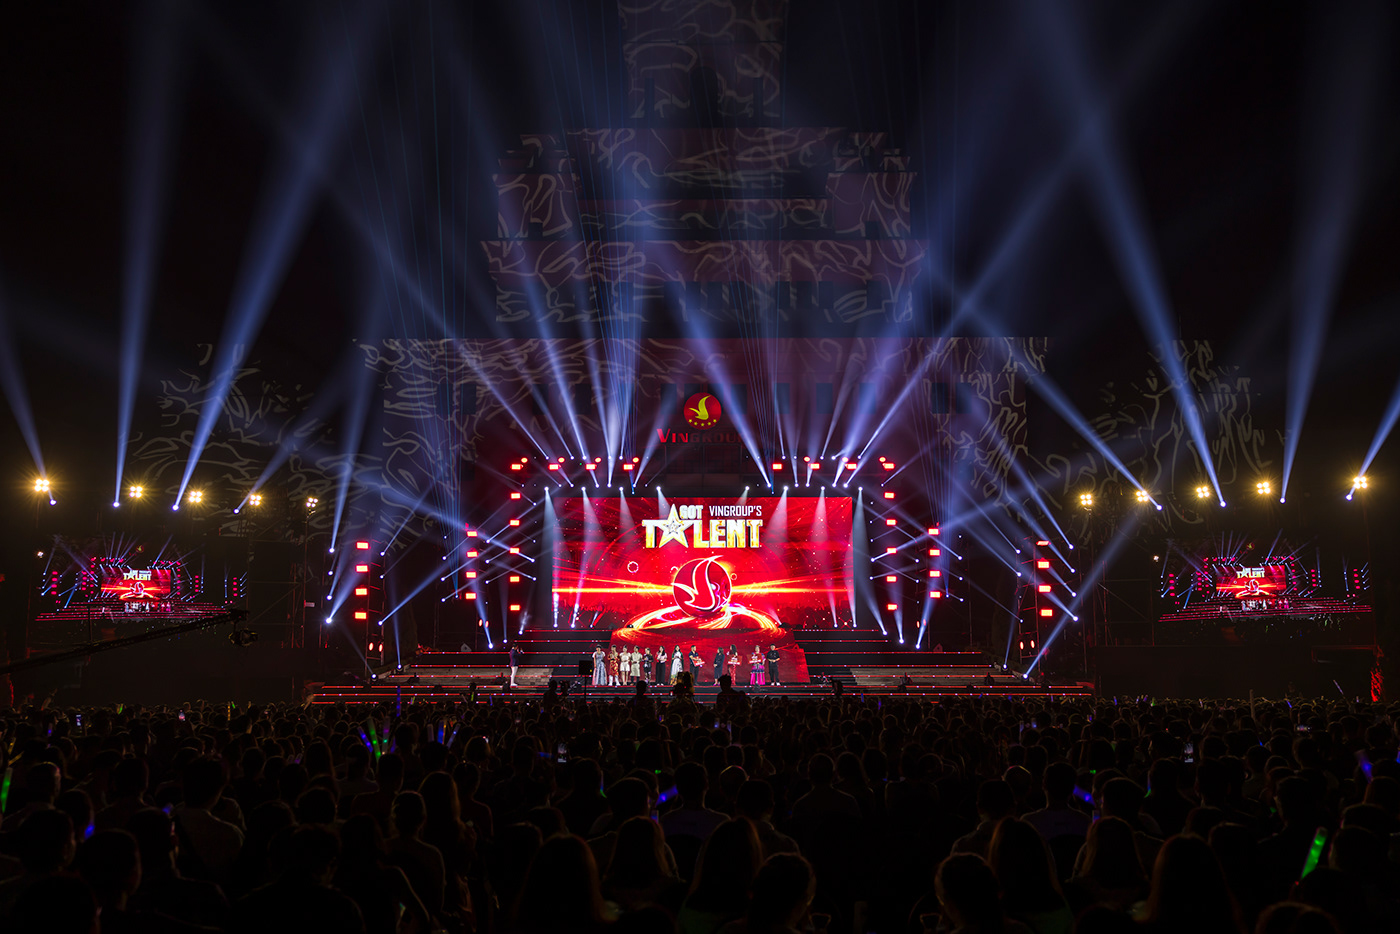 Event vingroup Stage Huỳnh Quyết photographer Photography  Canon music festival canon r5